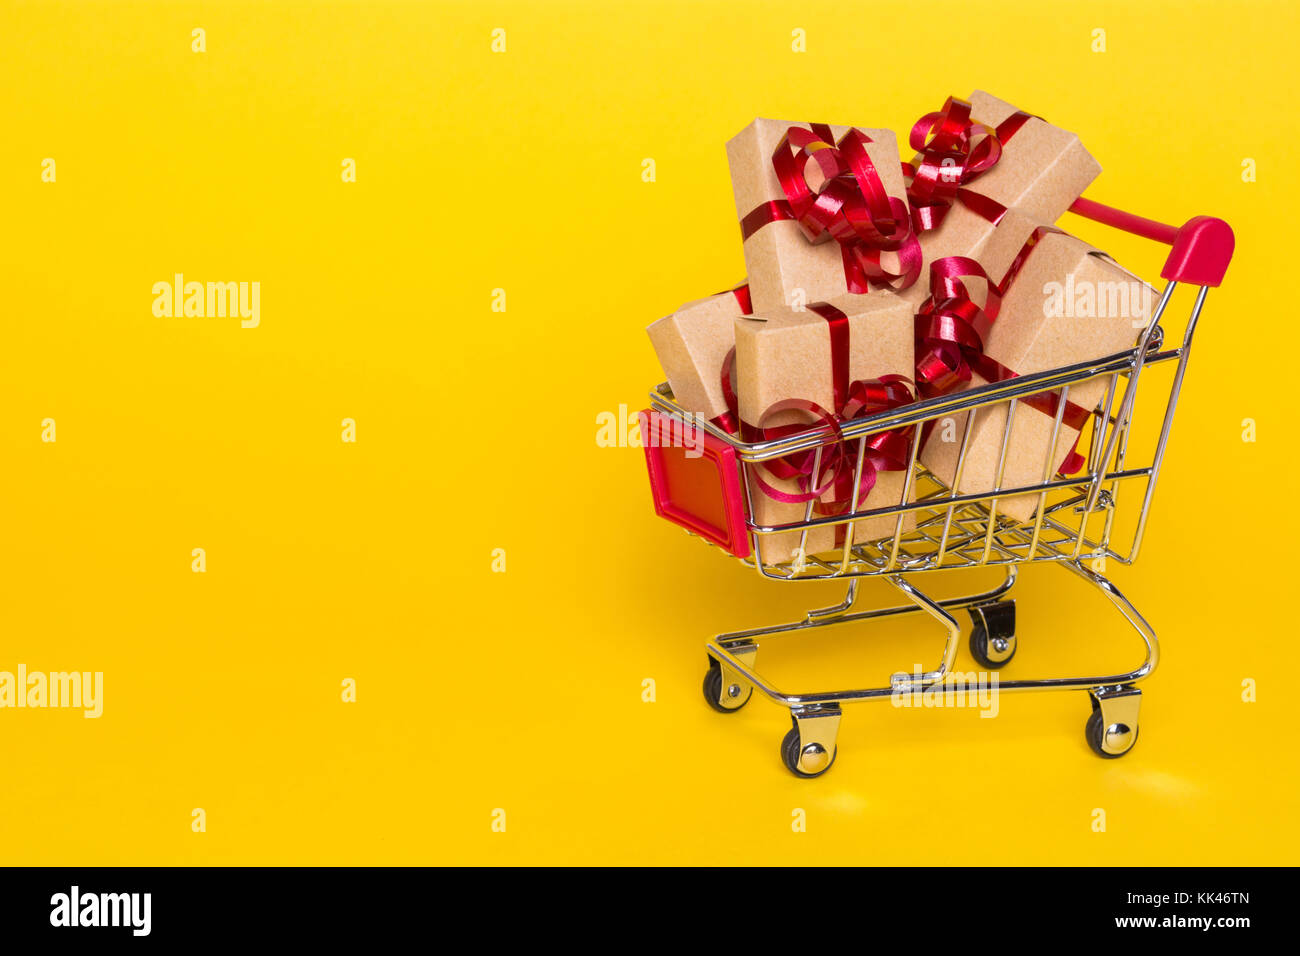 Creative concept with shopping trolley with gifts on a yellow background. Gifts wrapped in kraft paper with a red ribbon and bow. Stock Photo